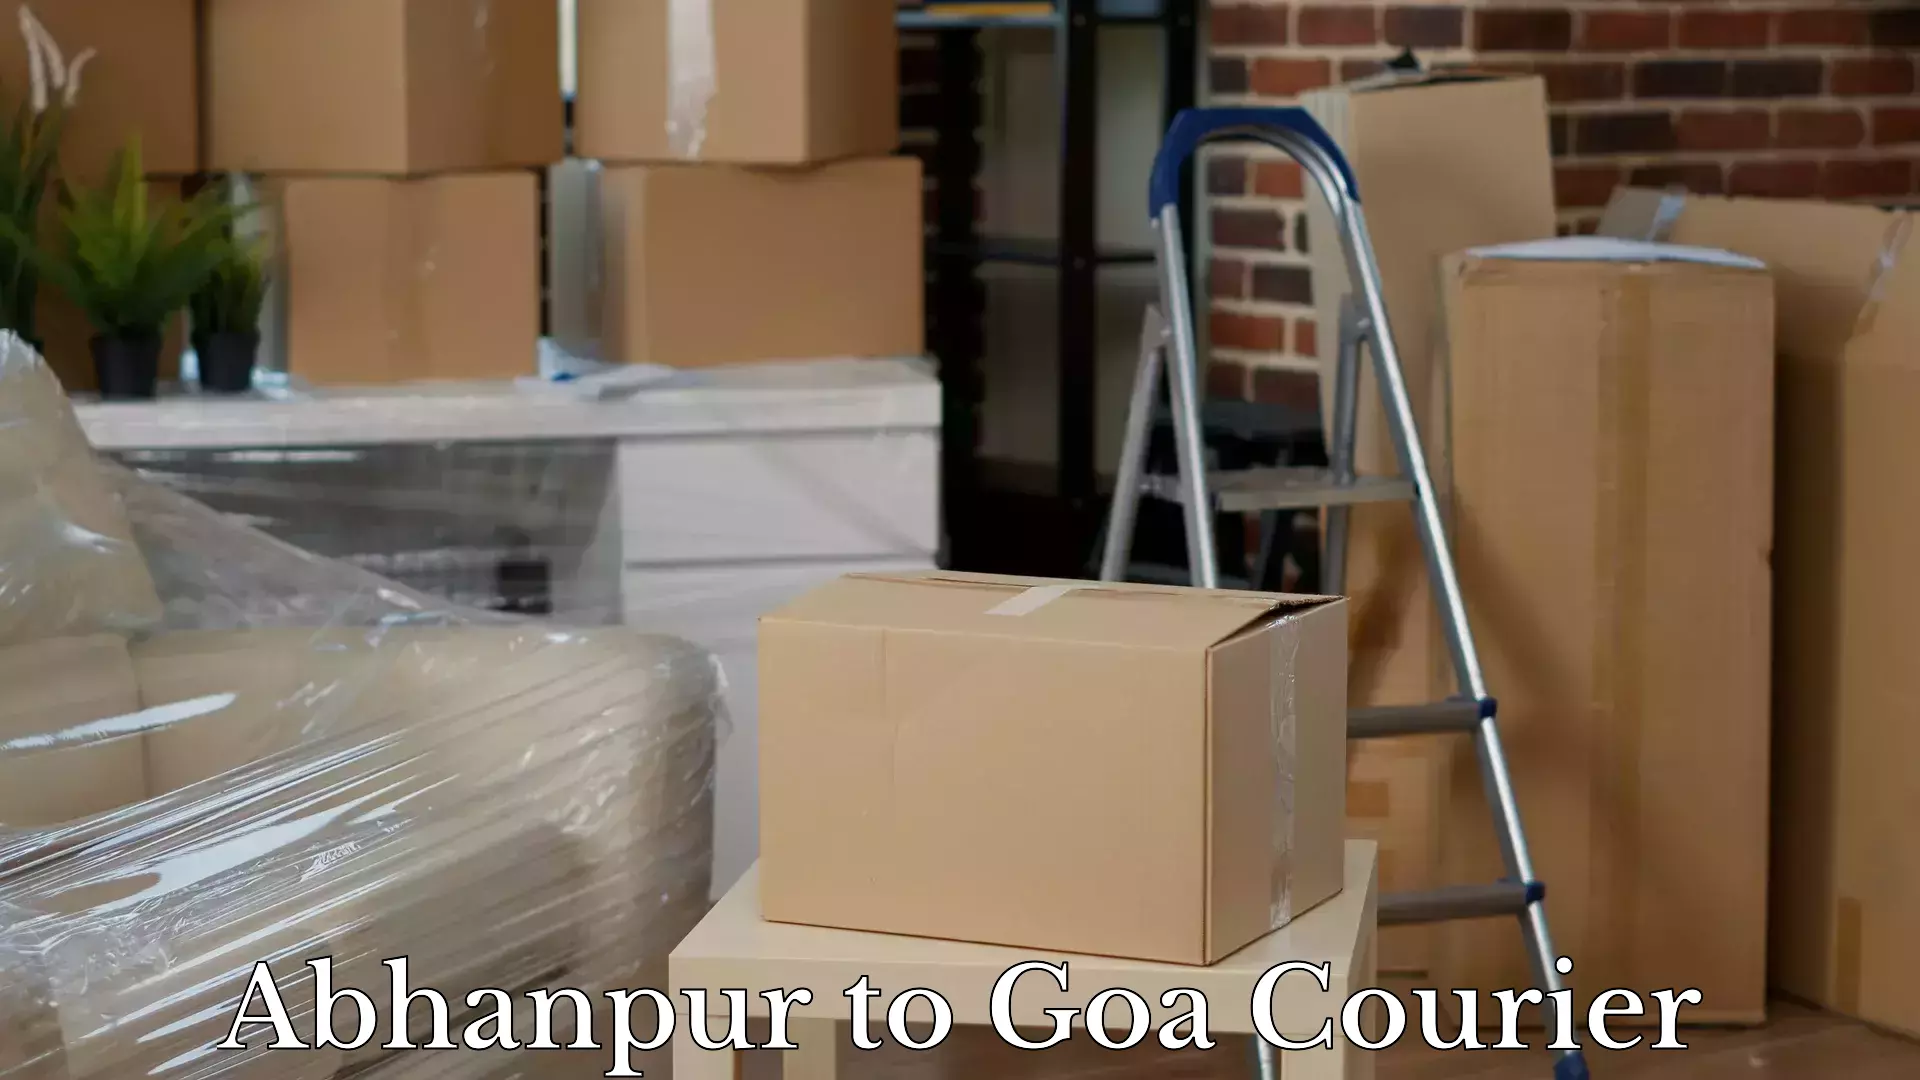 Baggage transport network Abhanpur to South Goa